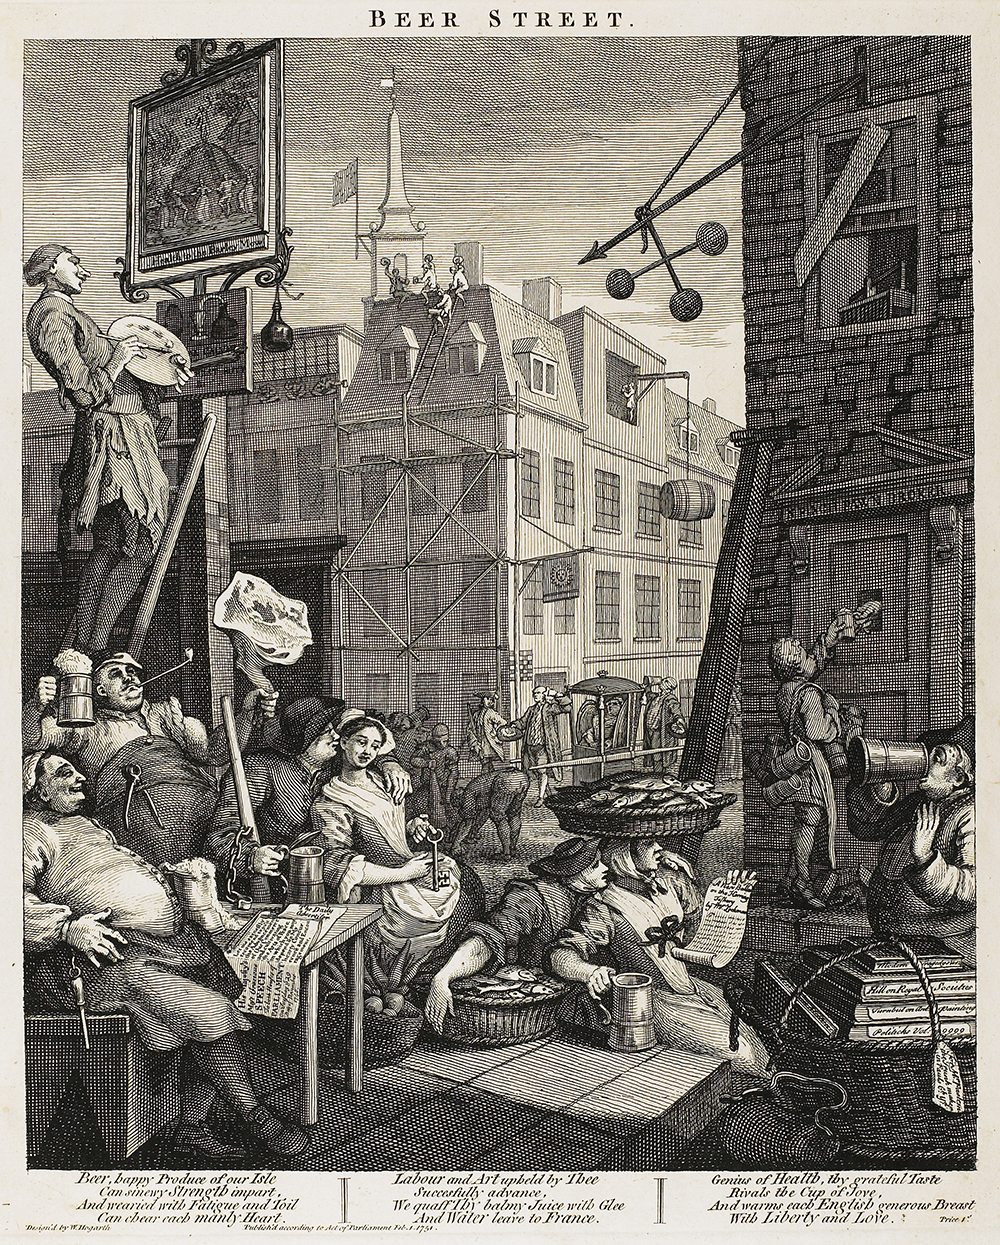 Black and white etching of an 18th century scene depicting the street life of villagers drinking beer and socializing.